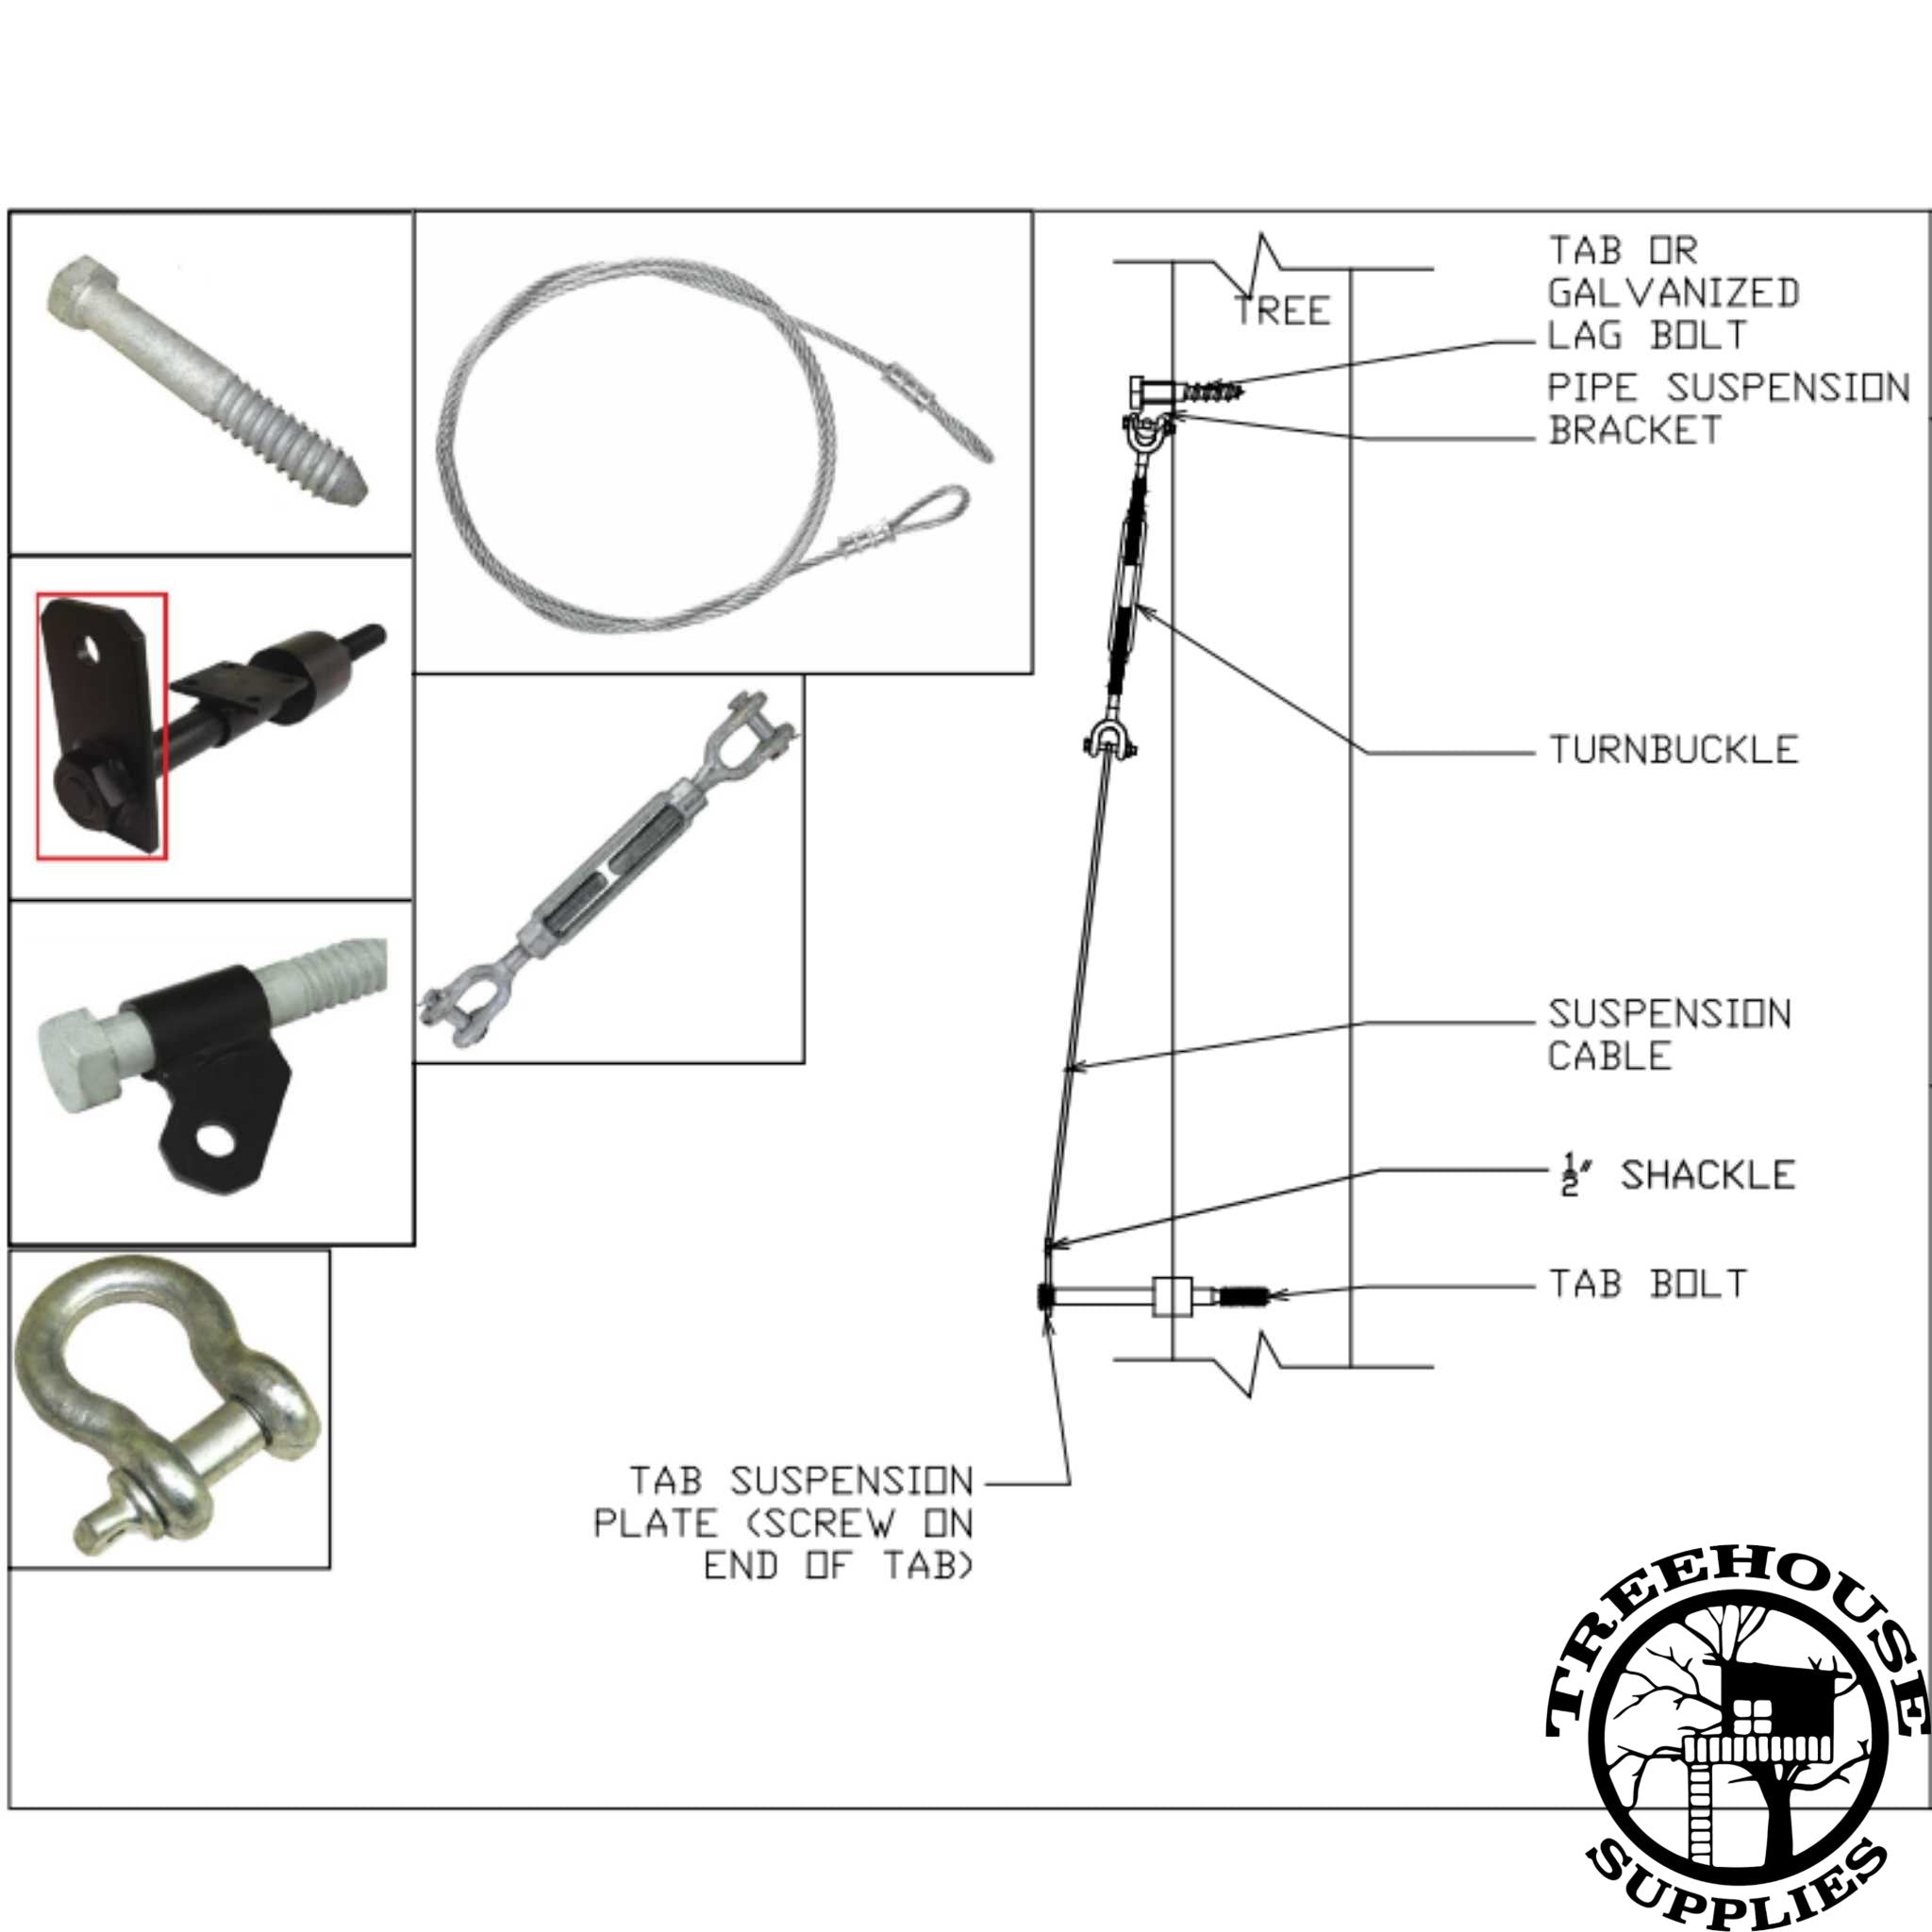 Image of TAB Suspension System Plans. Individual products featured on left hand side.